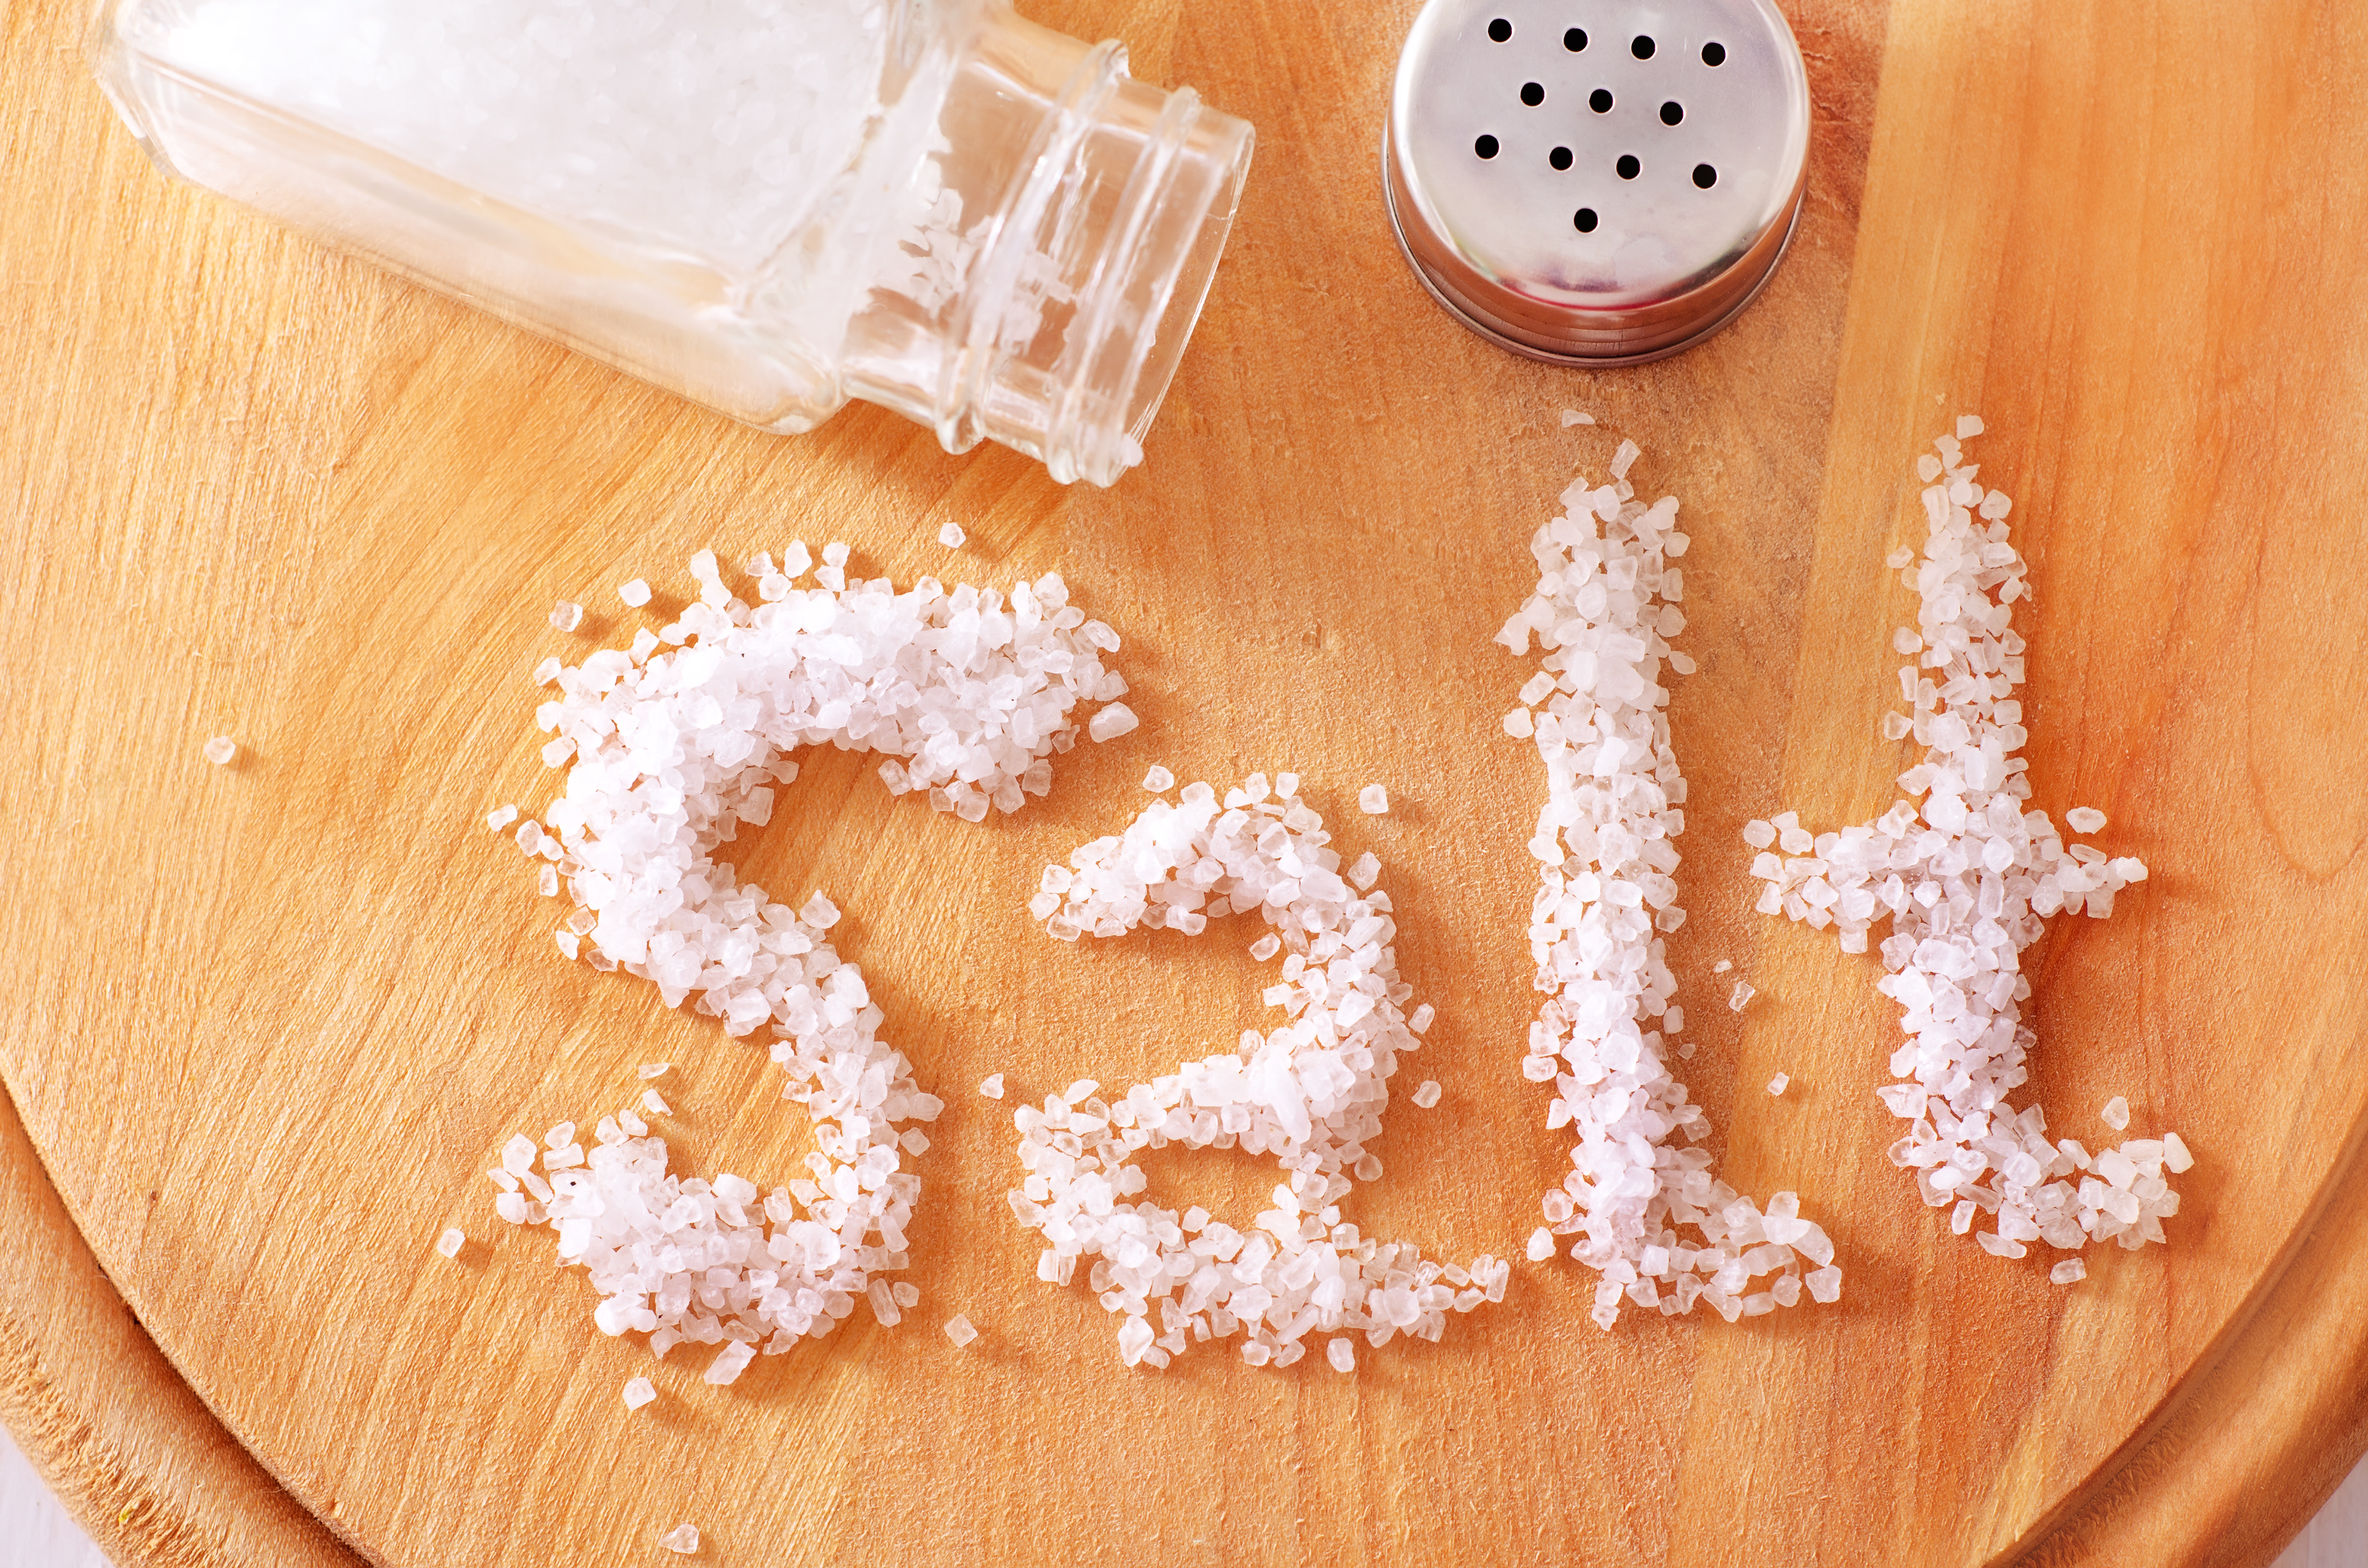 Sodium overload can lead to conditions such as high blood pressure or heart and kidney disease. (Photo: Shutterstock)